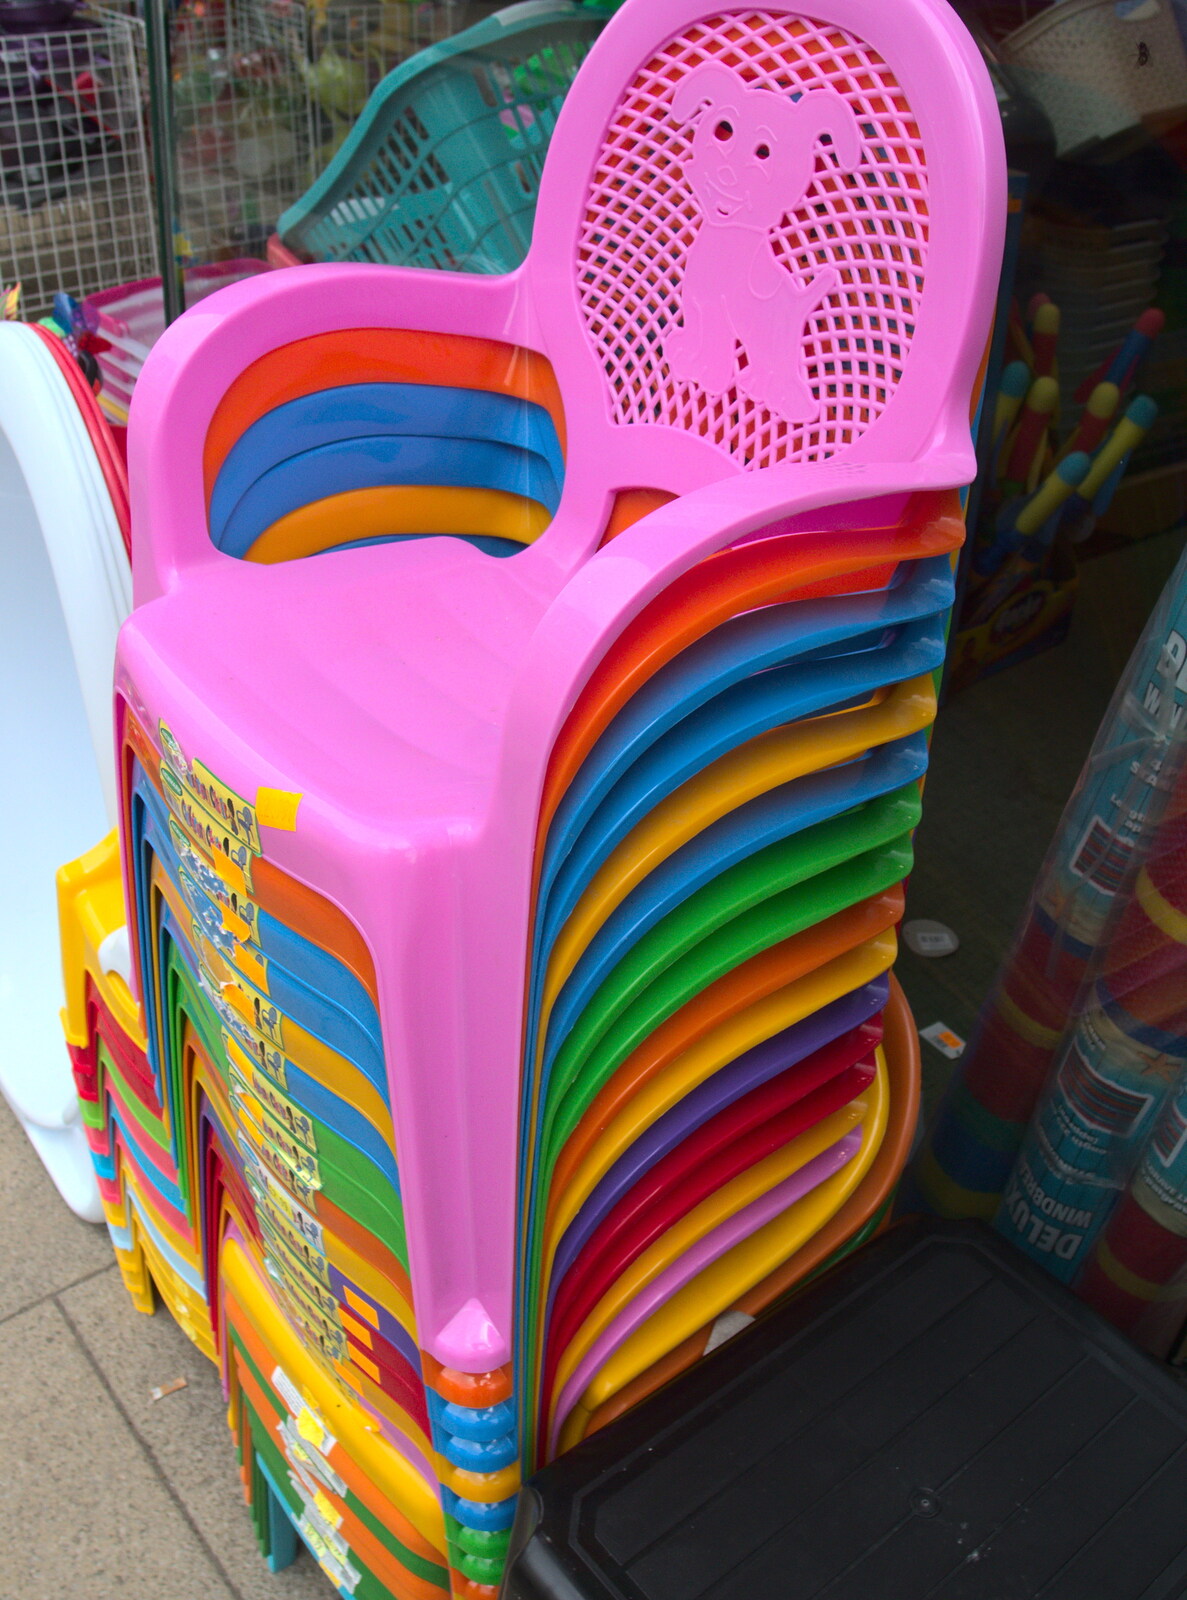 A stack of colourful plastic chairs from A visit from Da Gorls, Brome, Suffolk - 27th June 2015